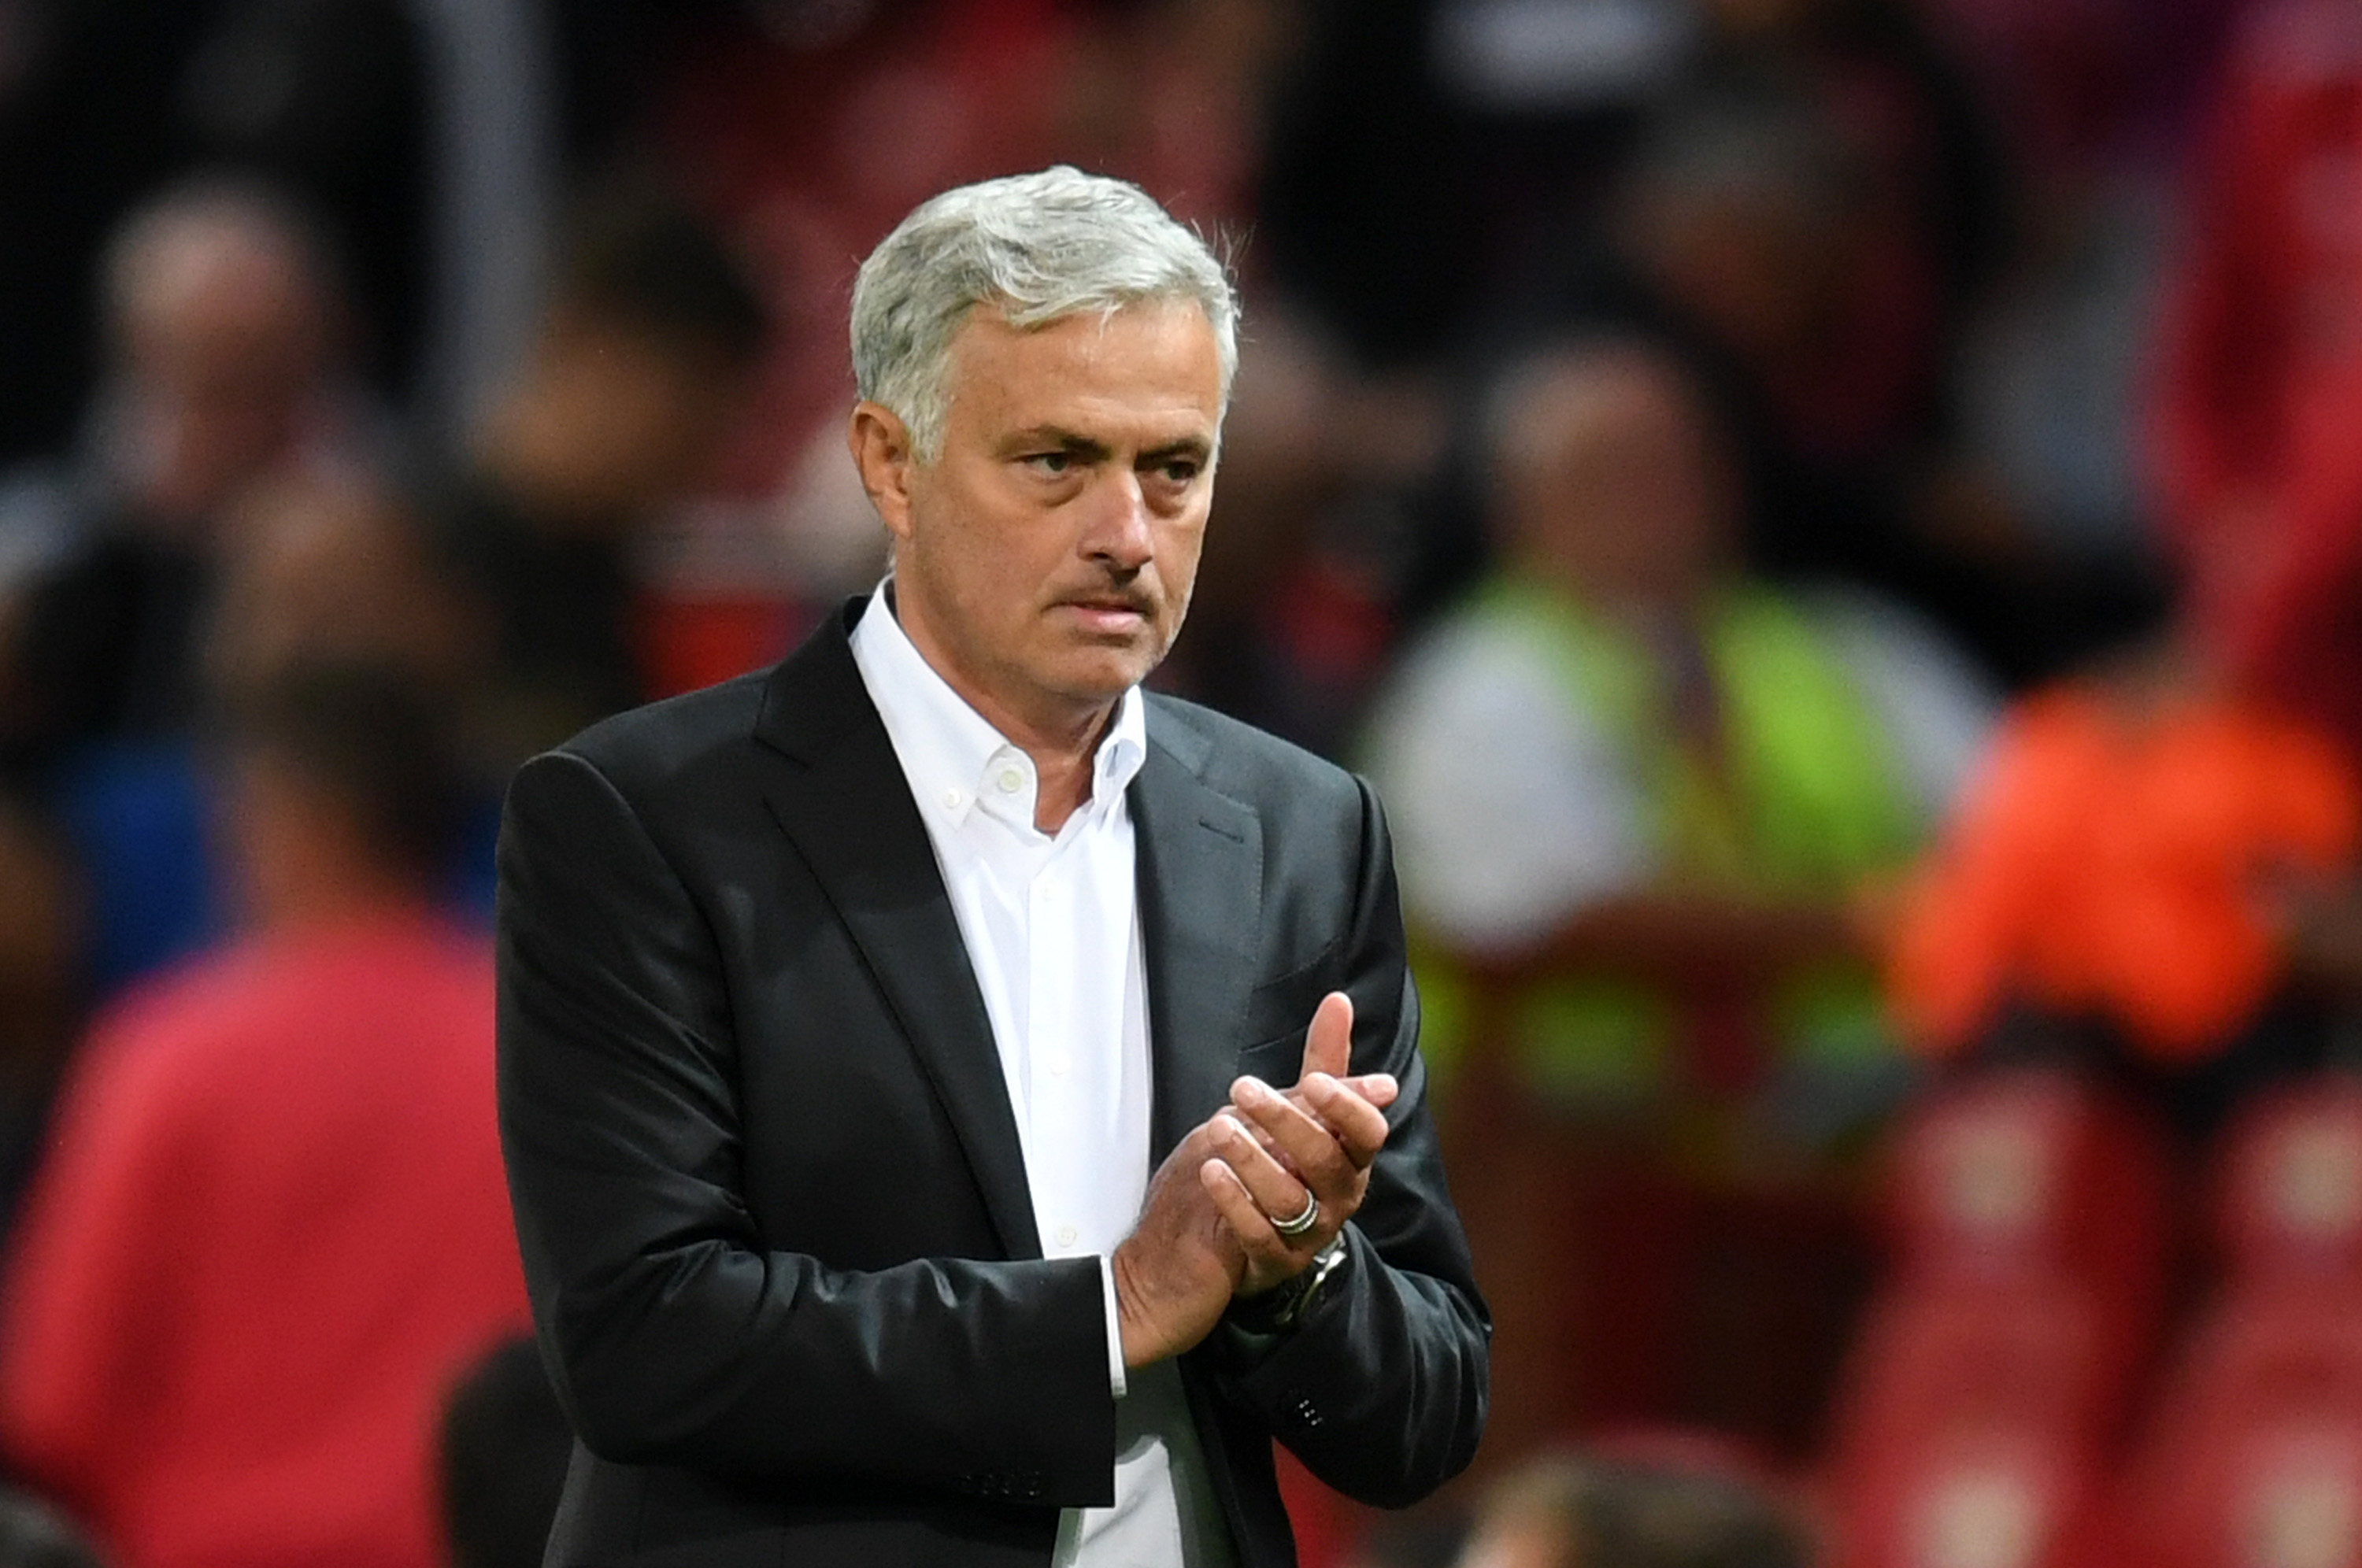 MANCHESTER, ENGLAND - AUGUST 10:  Jose Mourinho, Manager of Manchester United reacts during the Premier League match between Manchester United and Leicester City at Old Trafford on August 10, 2018 in Manchester, United Kingdom.  (Photo by Michael Regan/Getty Images)